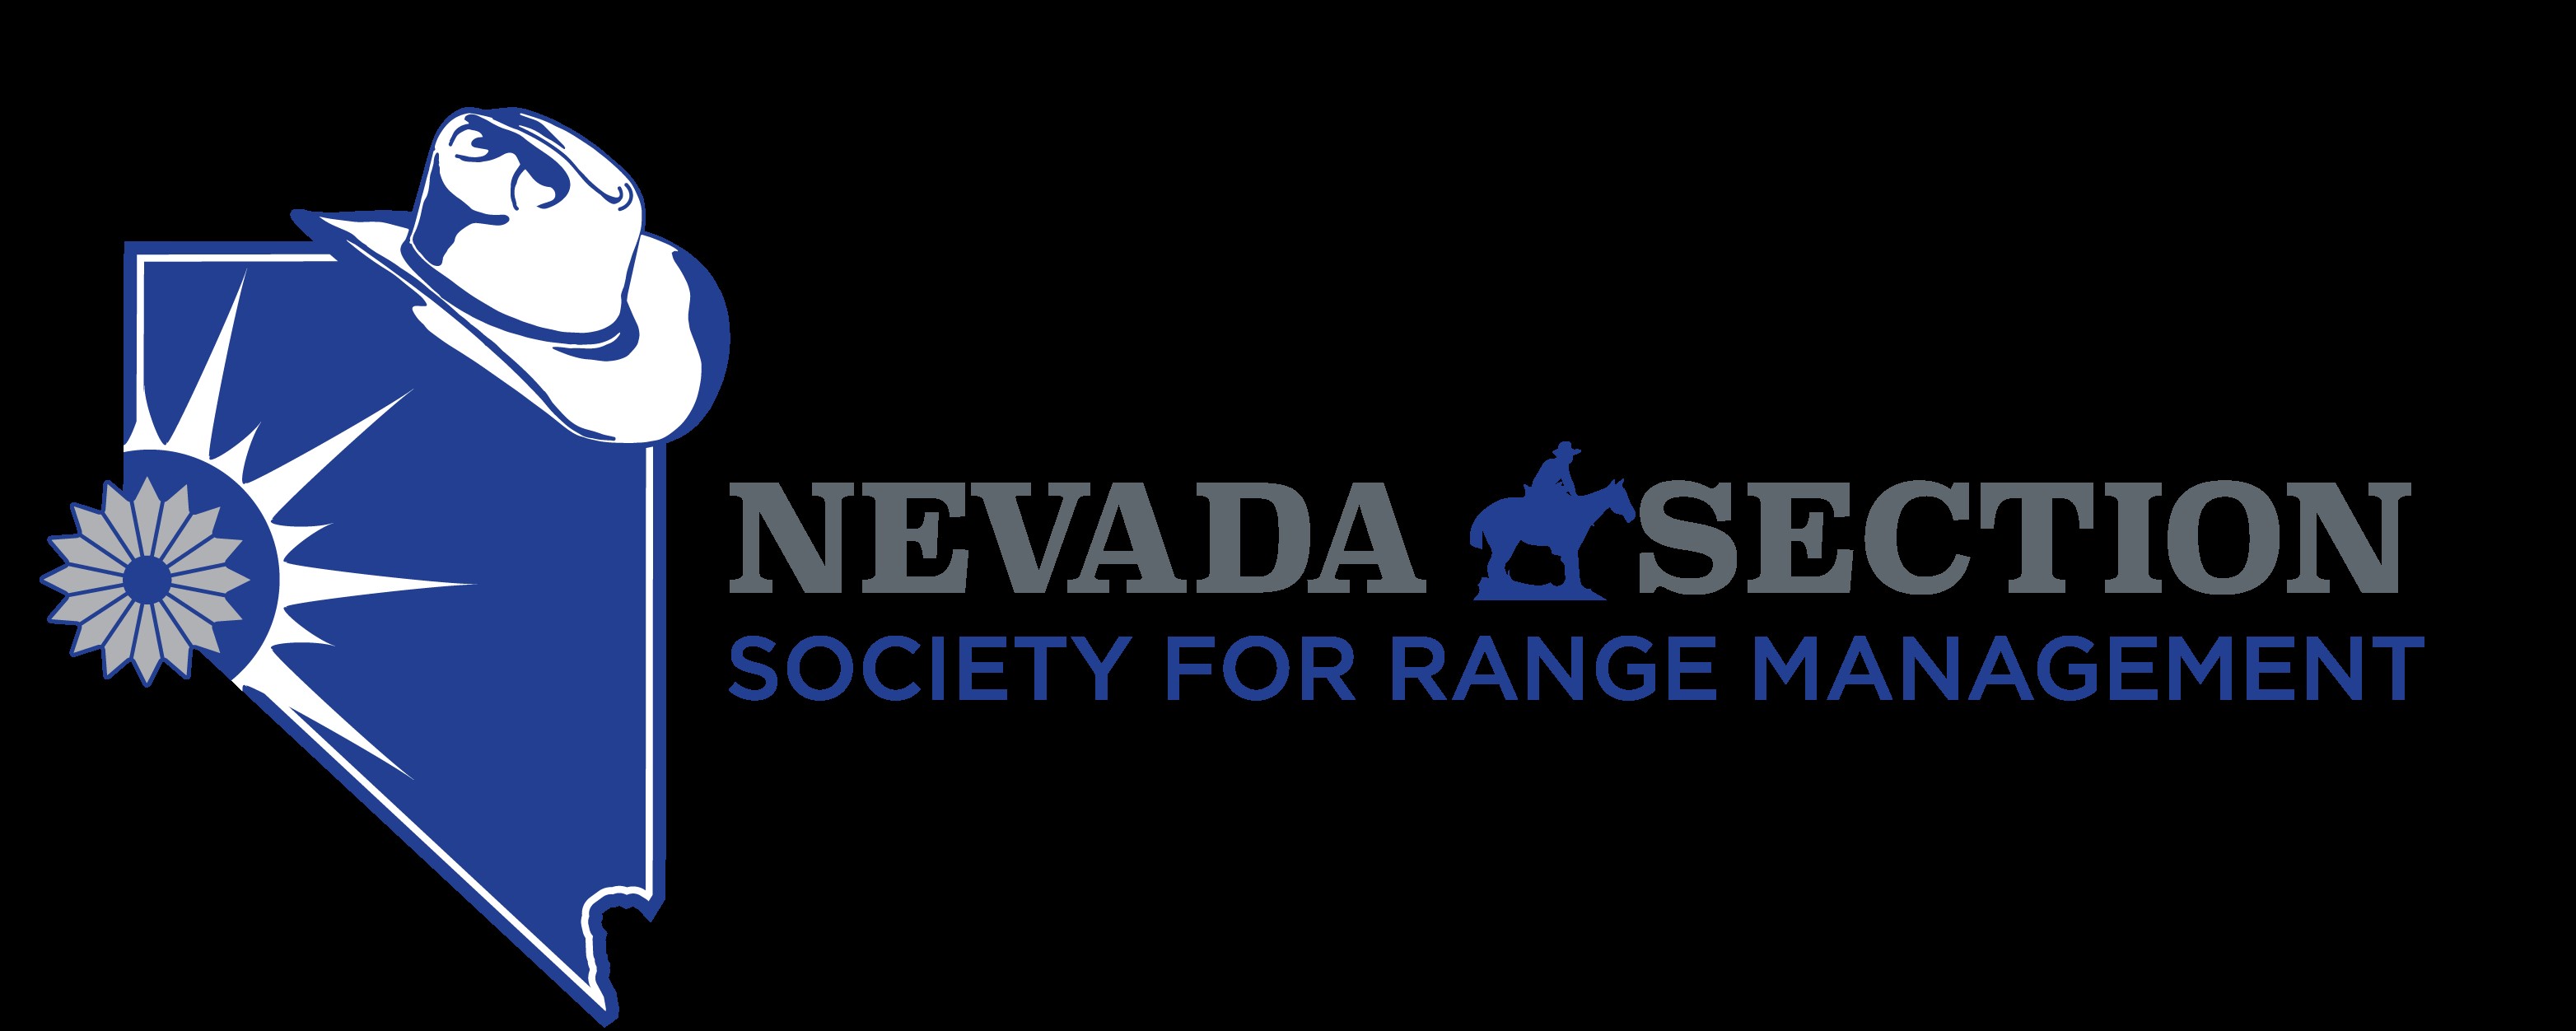 Nevada Section